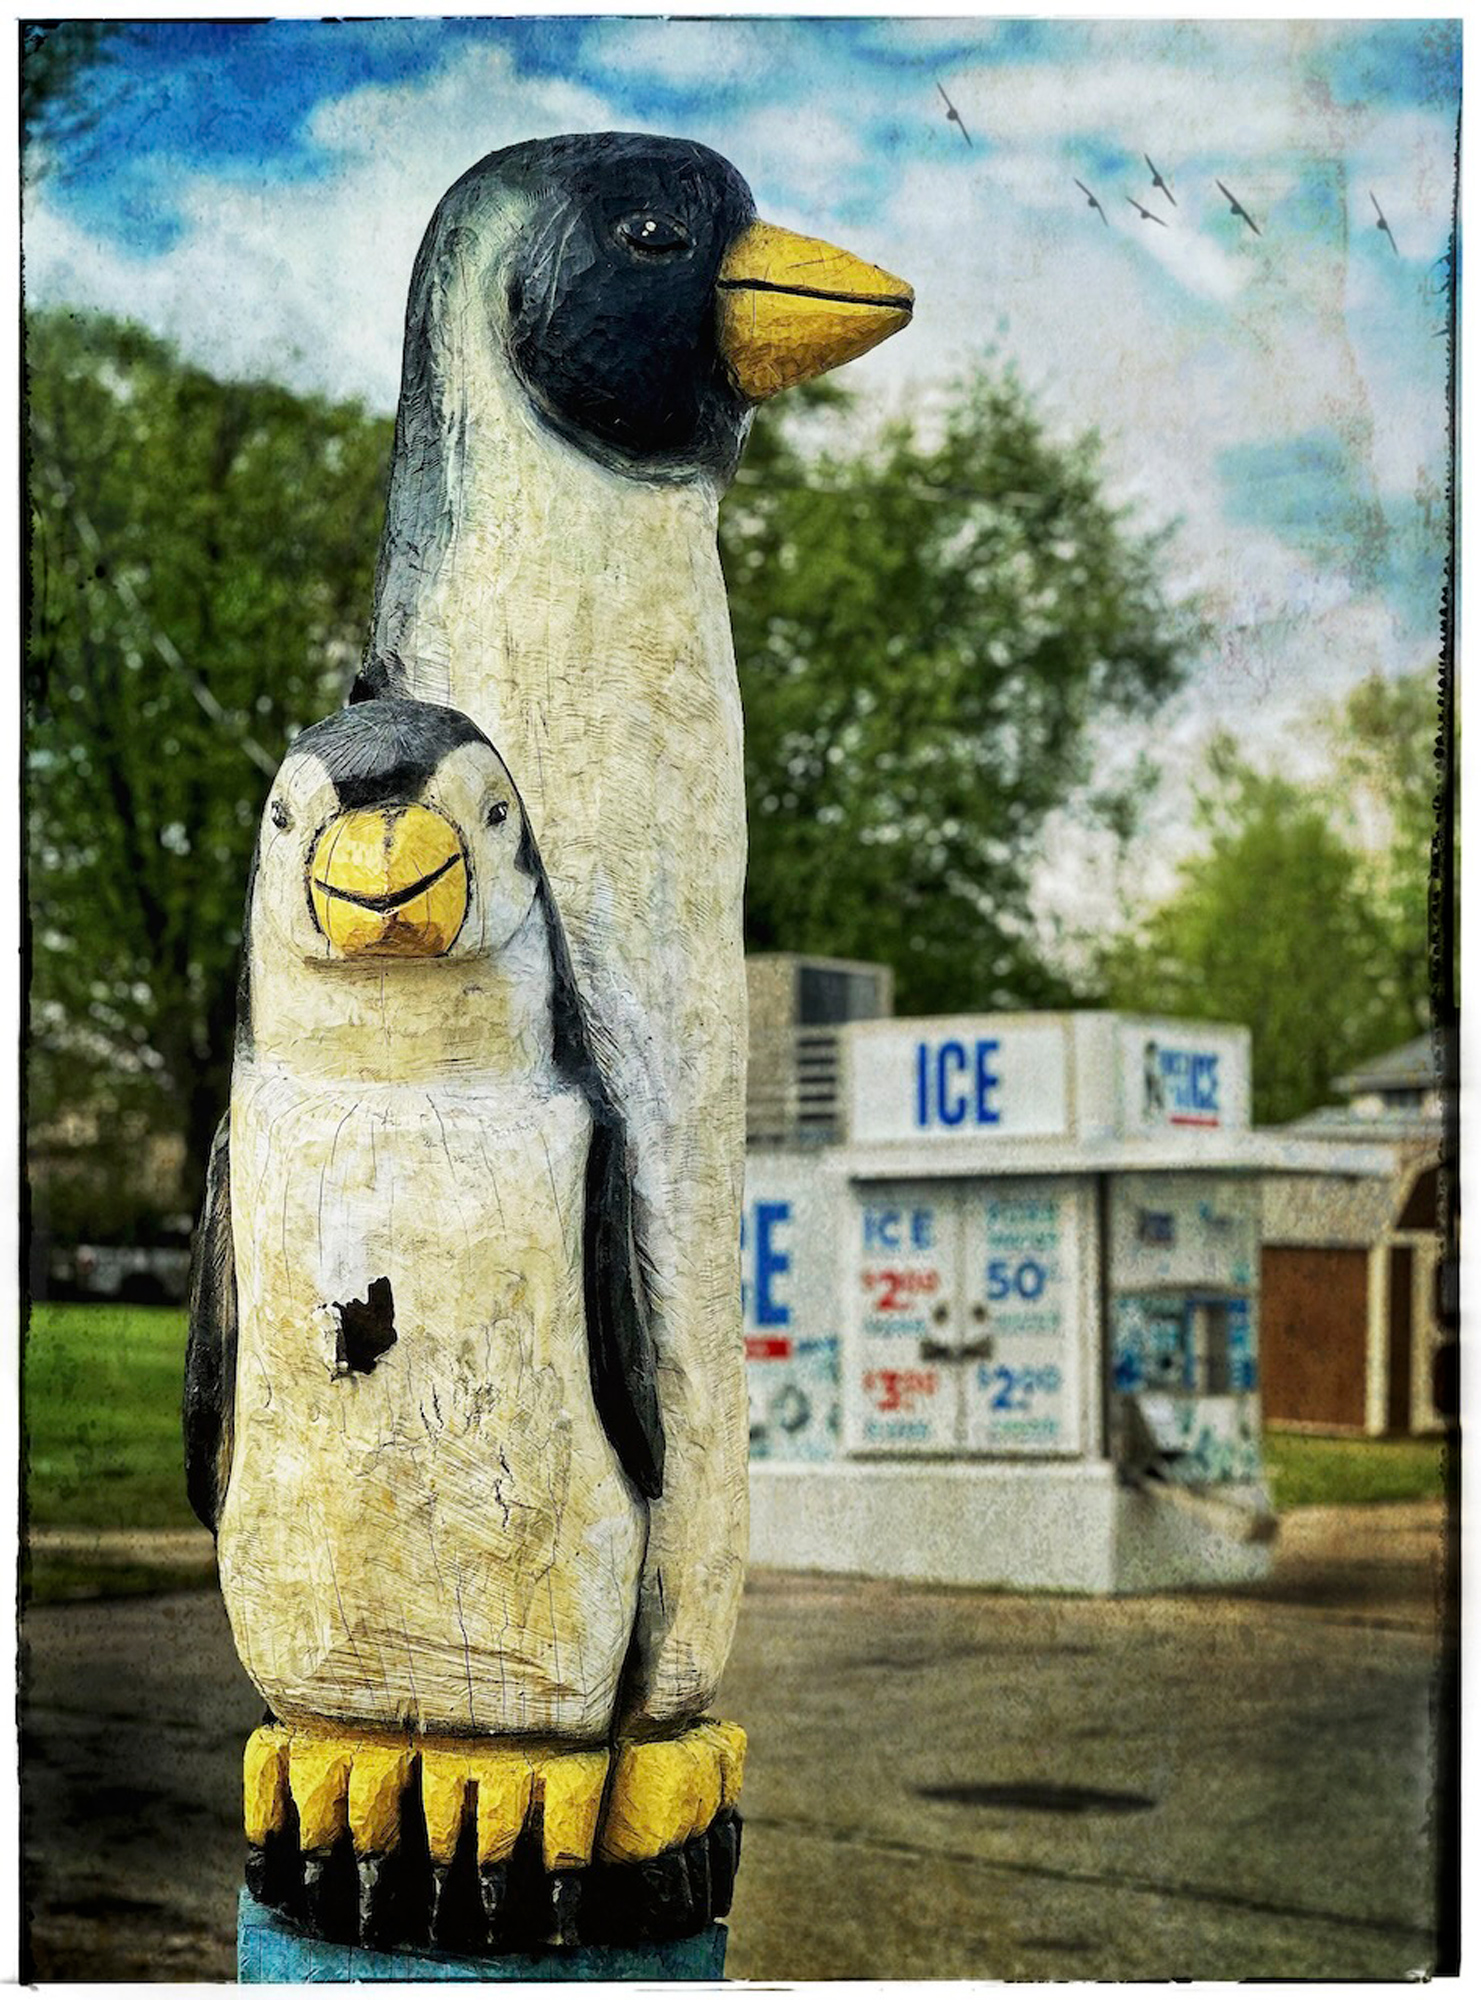 Our first stop was this crazy automated Ice Vending Machine. I like the two Penguins. Shot as a RAW file and processed. The modified in SNapseed, and texture and birds were added in Distress+